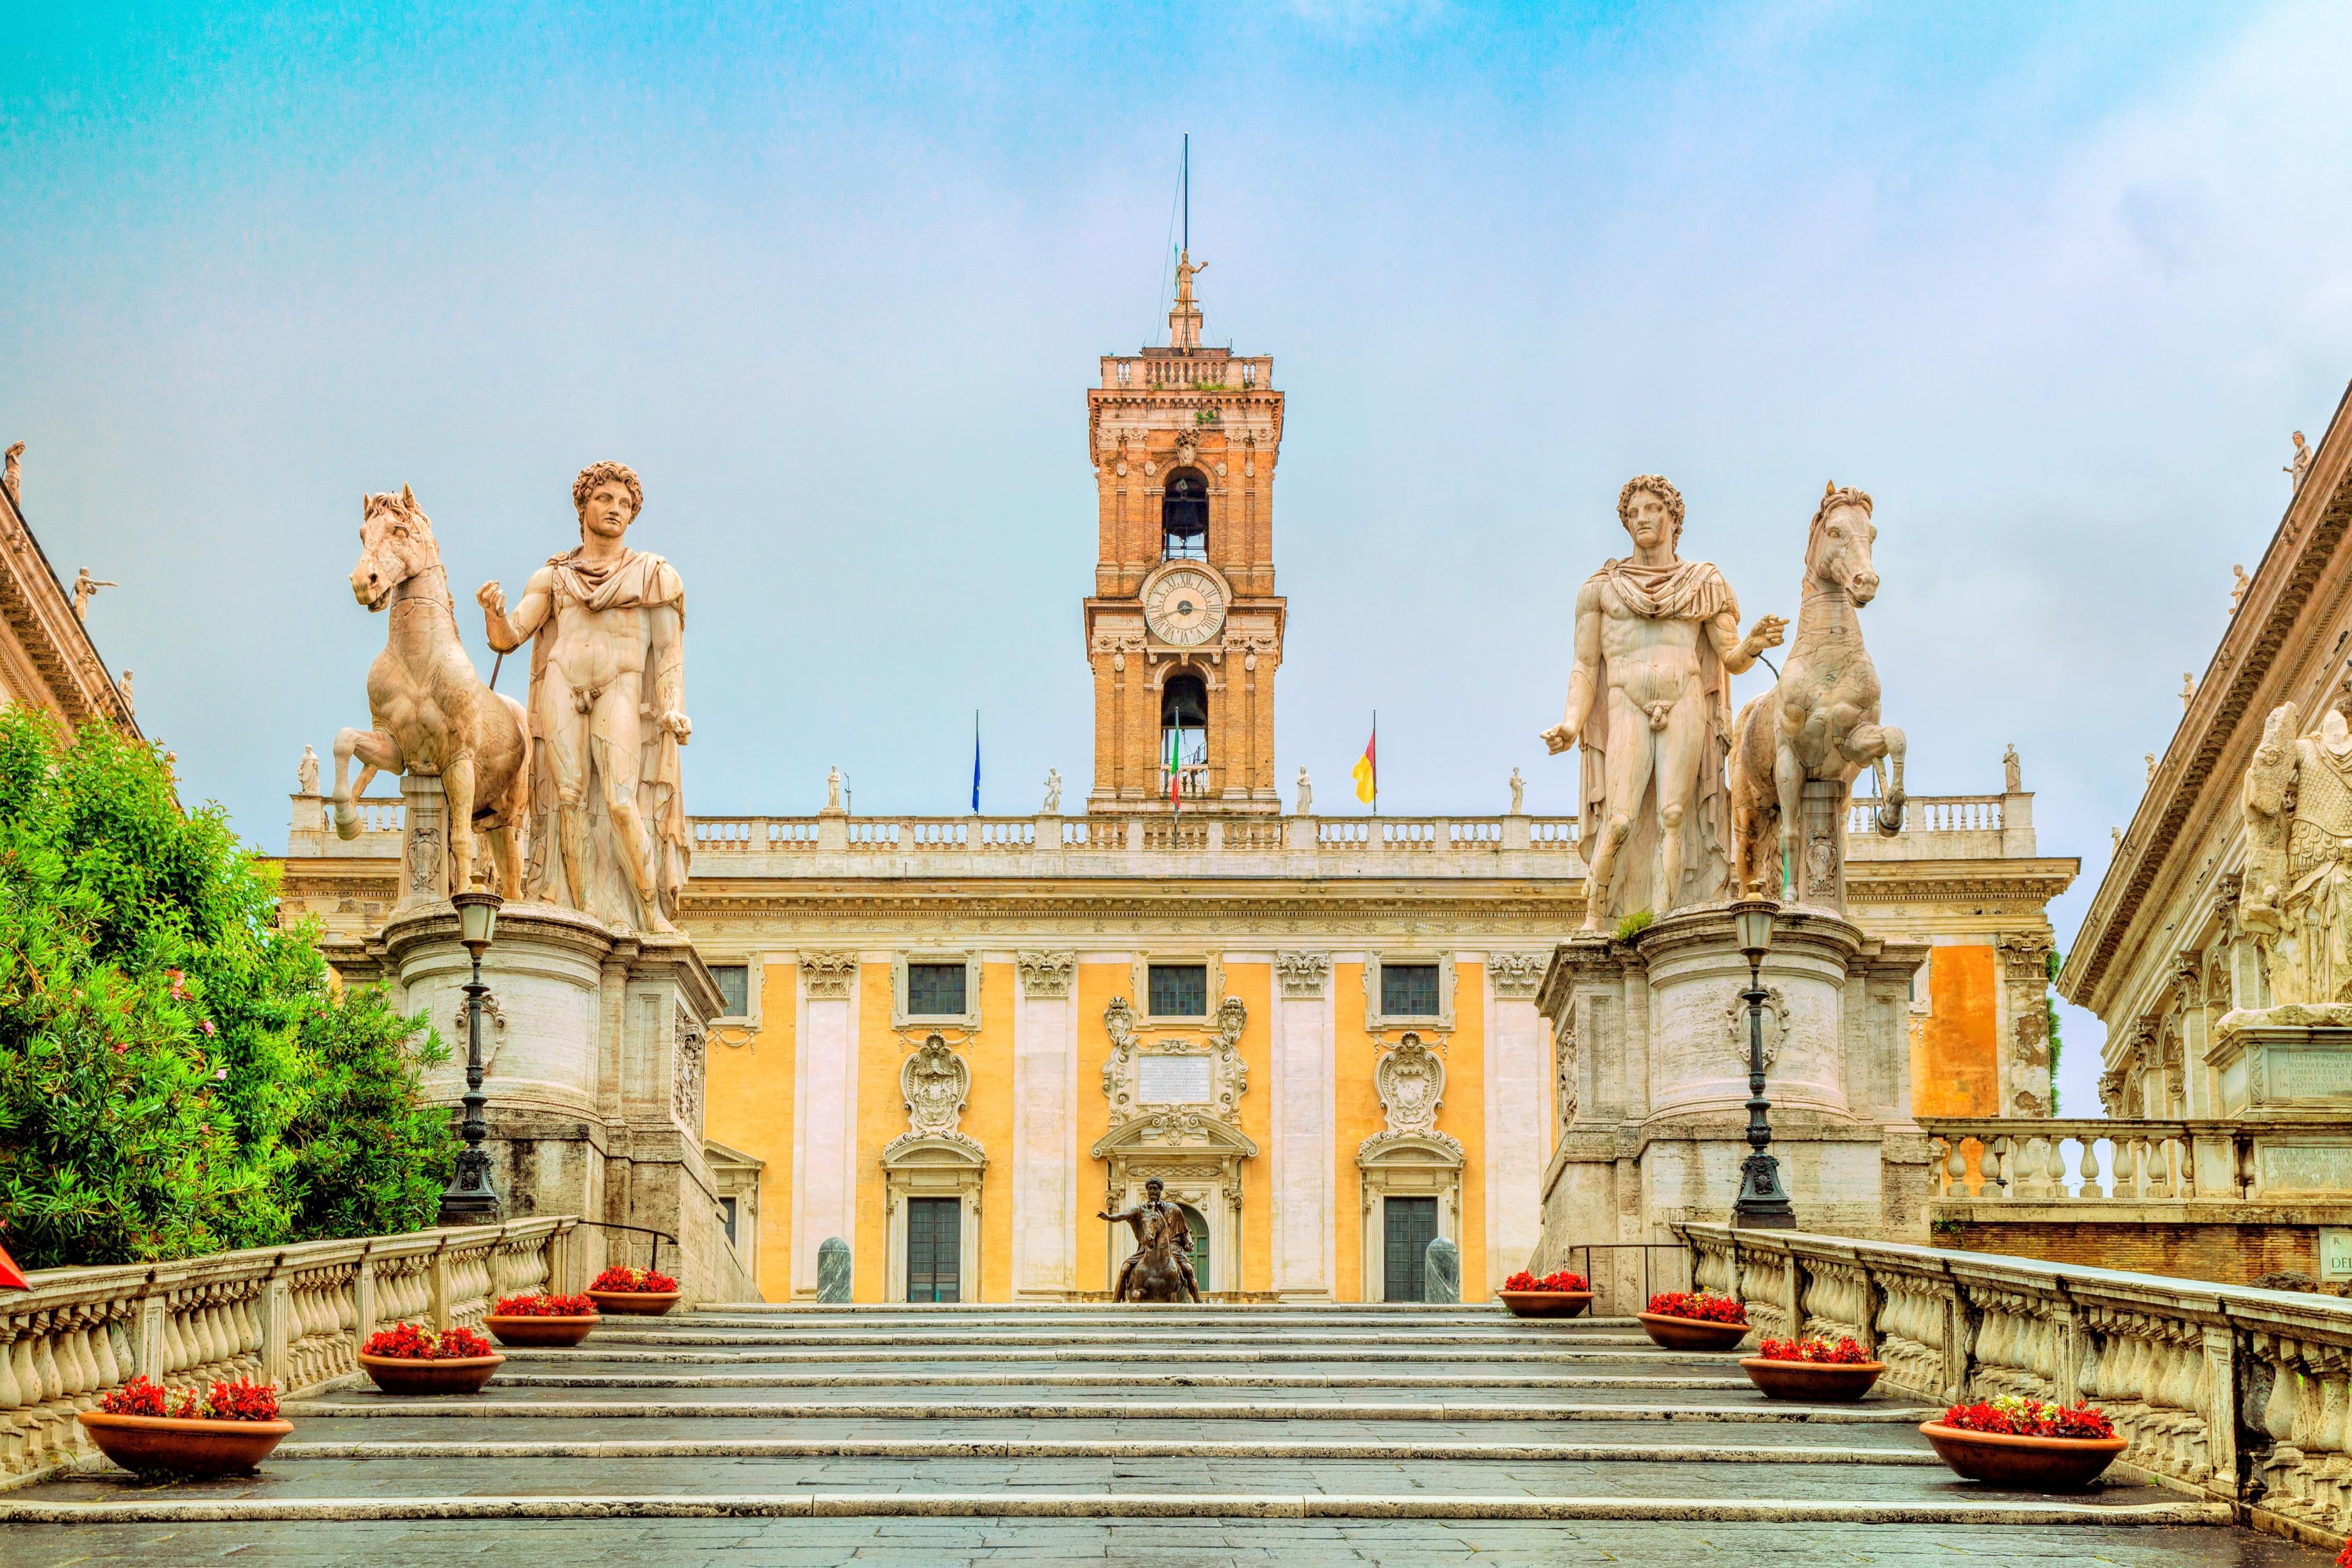 Visit the Capitoline Museum, known as the oldest art museum in the world